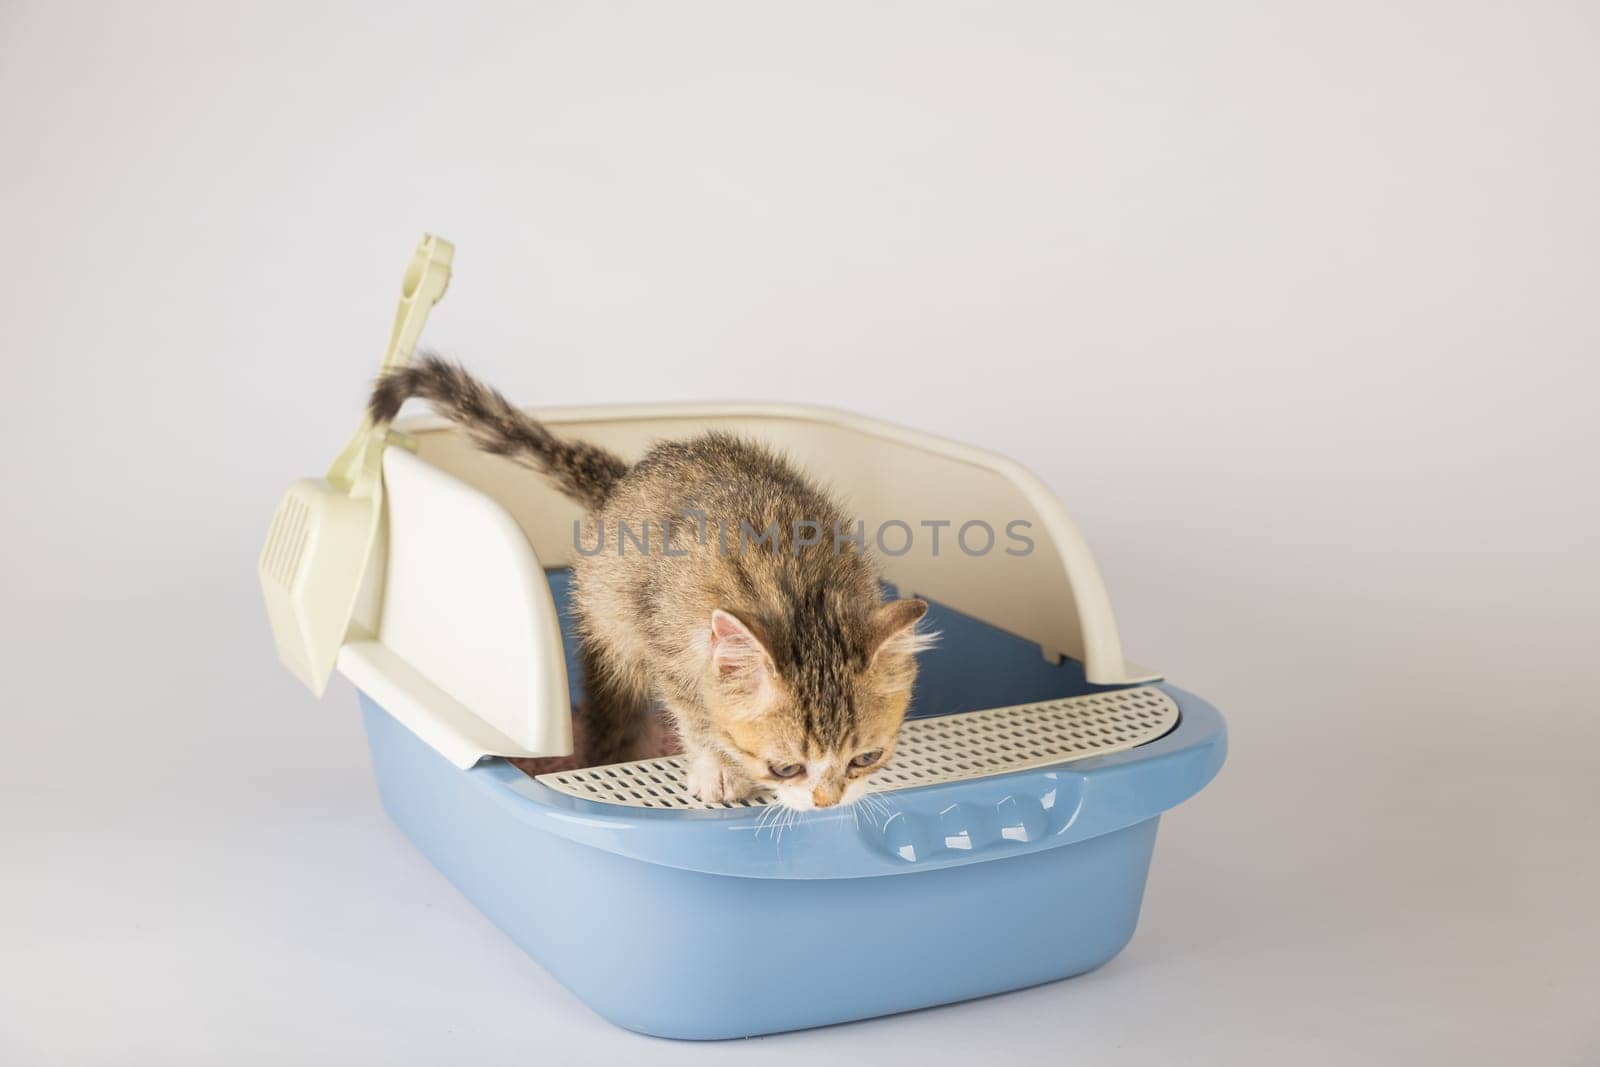 Isolated cat found in plastic litter toilet box or sandbox is featured against. educational image showcases feline hygiene and care accentuating a pristine well-maintained environment.